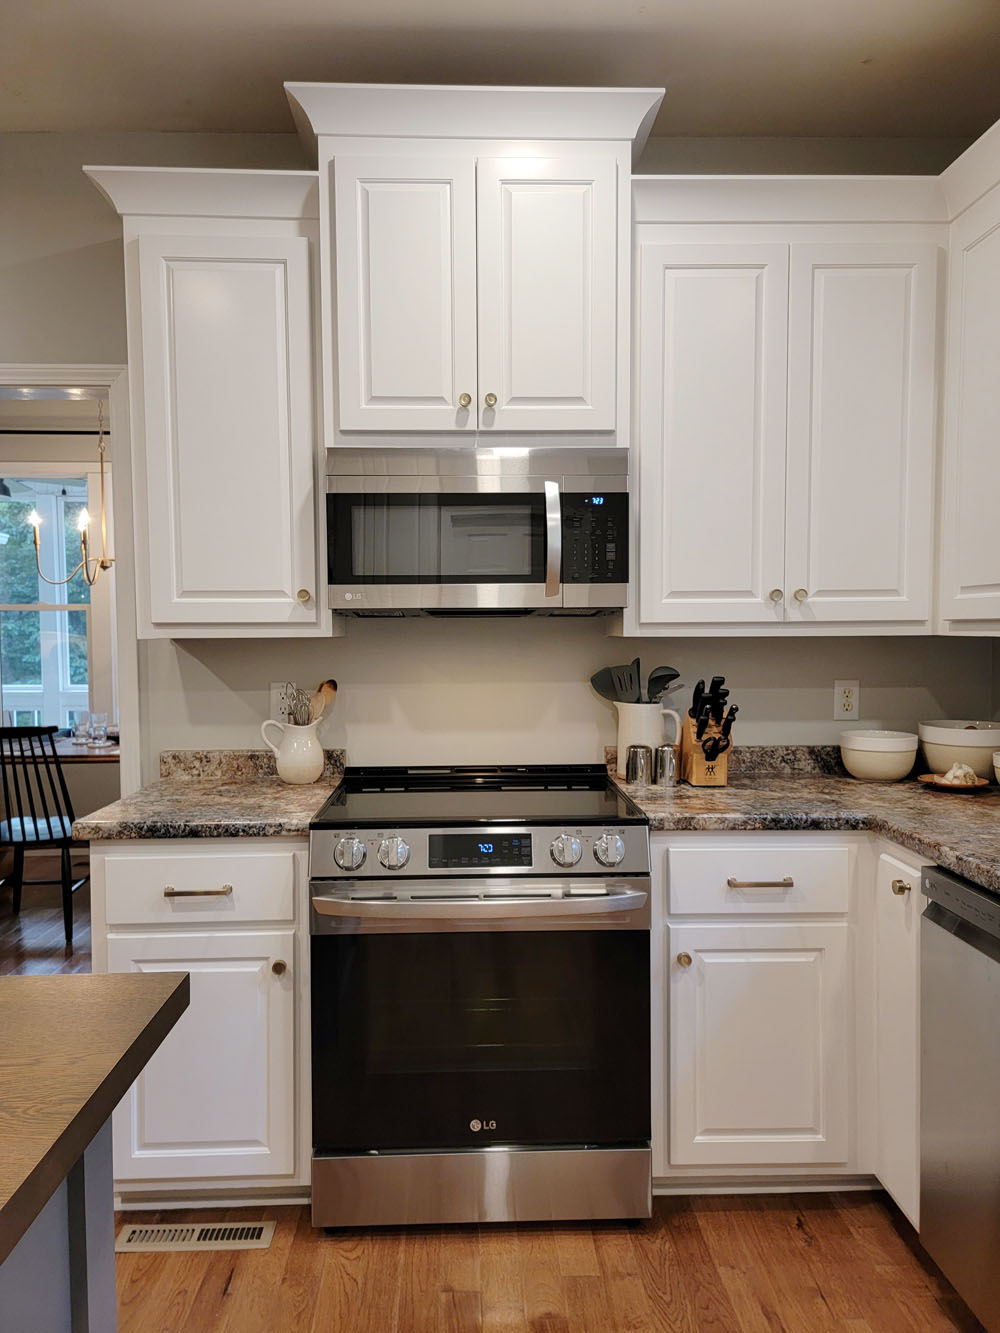 Completed kitchen renovation with new LG sterling silver appliances.